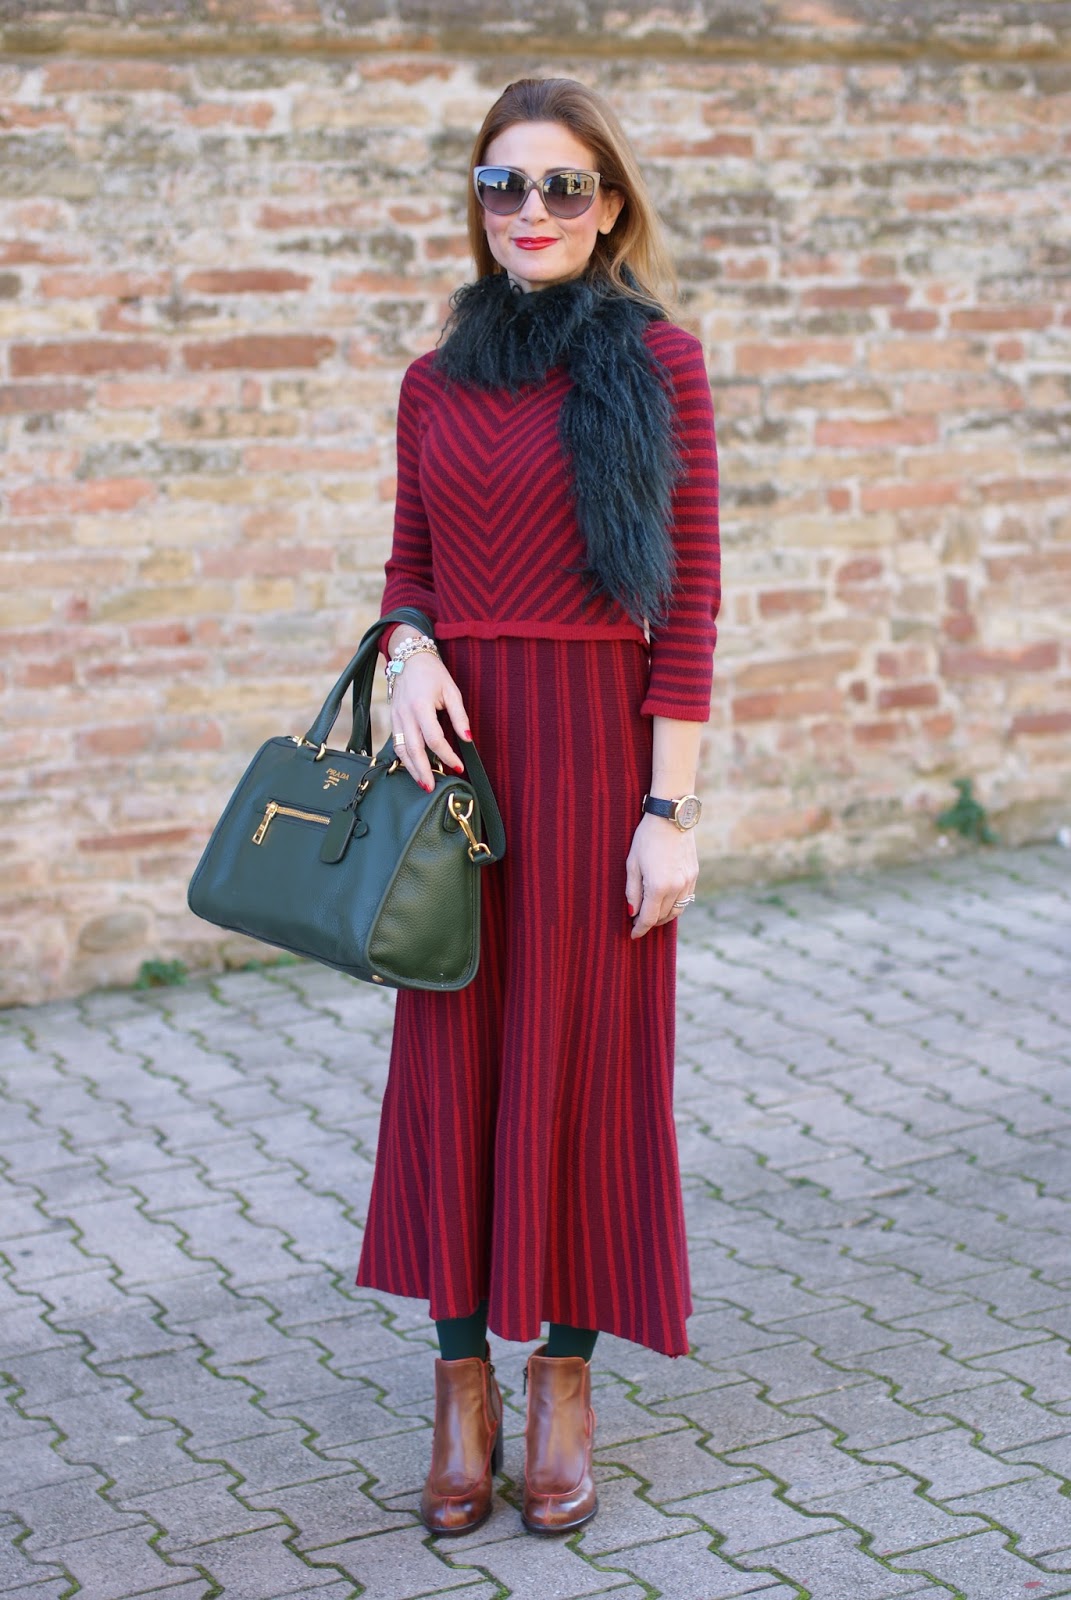 Made in Italy fashion: vintage style outfit | Fashion and Cookies ...